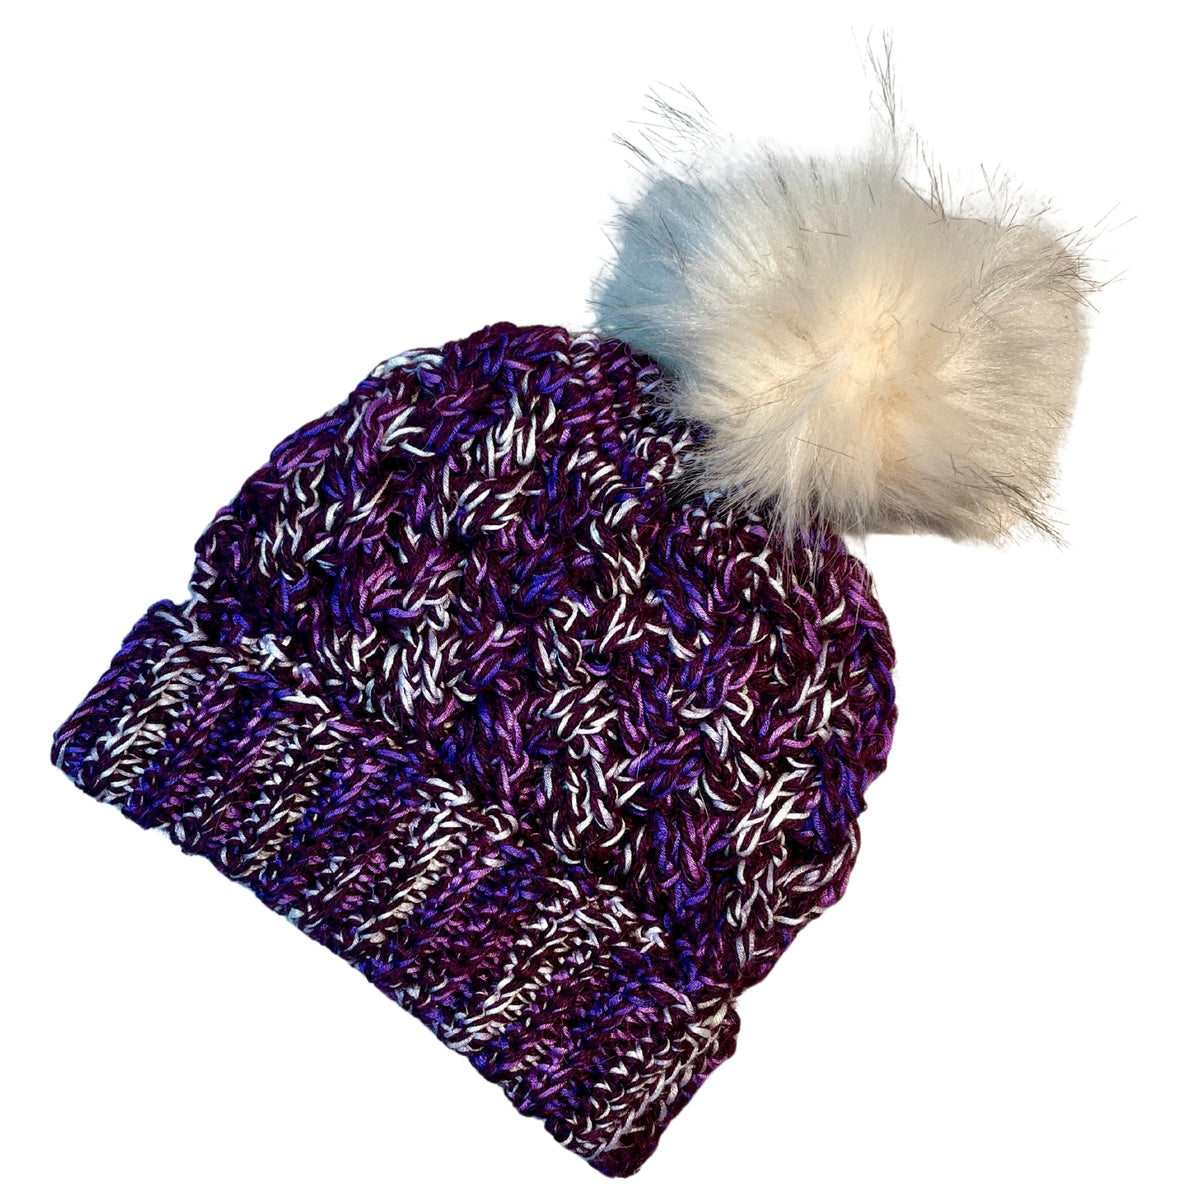 Deep purple, bright purple violet, and white colored cozy soft warm handmade knitted crochet celtic hat with a white pom pom made in Montana by Alpacas of Montana.